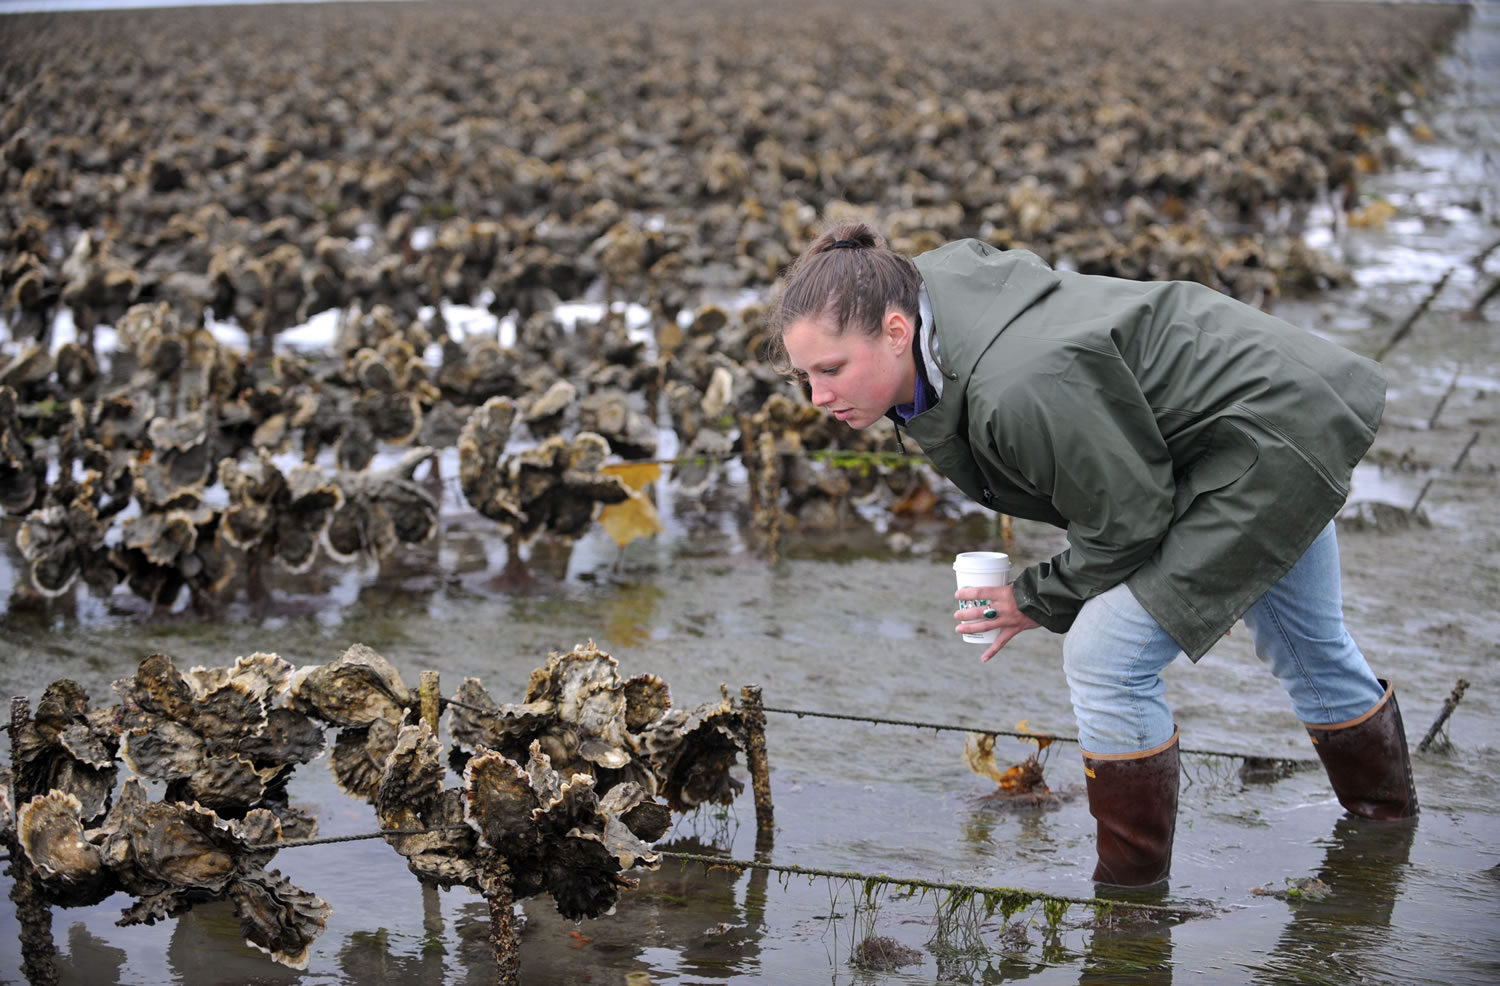 Retail manager Irene Fadden looks at oysters at Taylor Shellfish Farms at Samish Bay in 2010. They grow oysters and clams on 1,700 acres in the bay south of Bellingham. (Philip A.